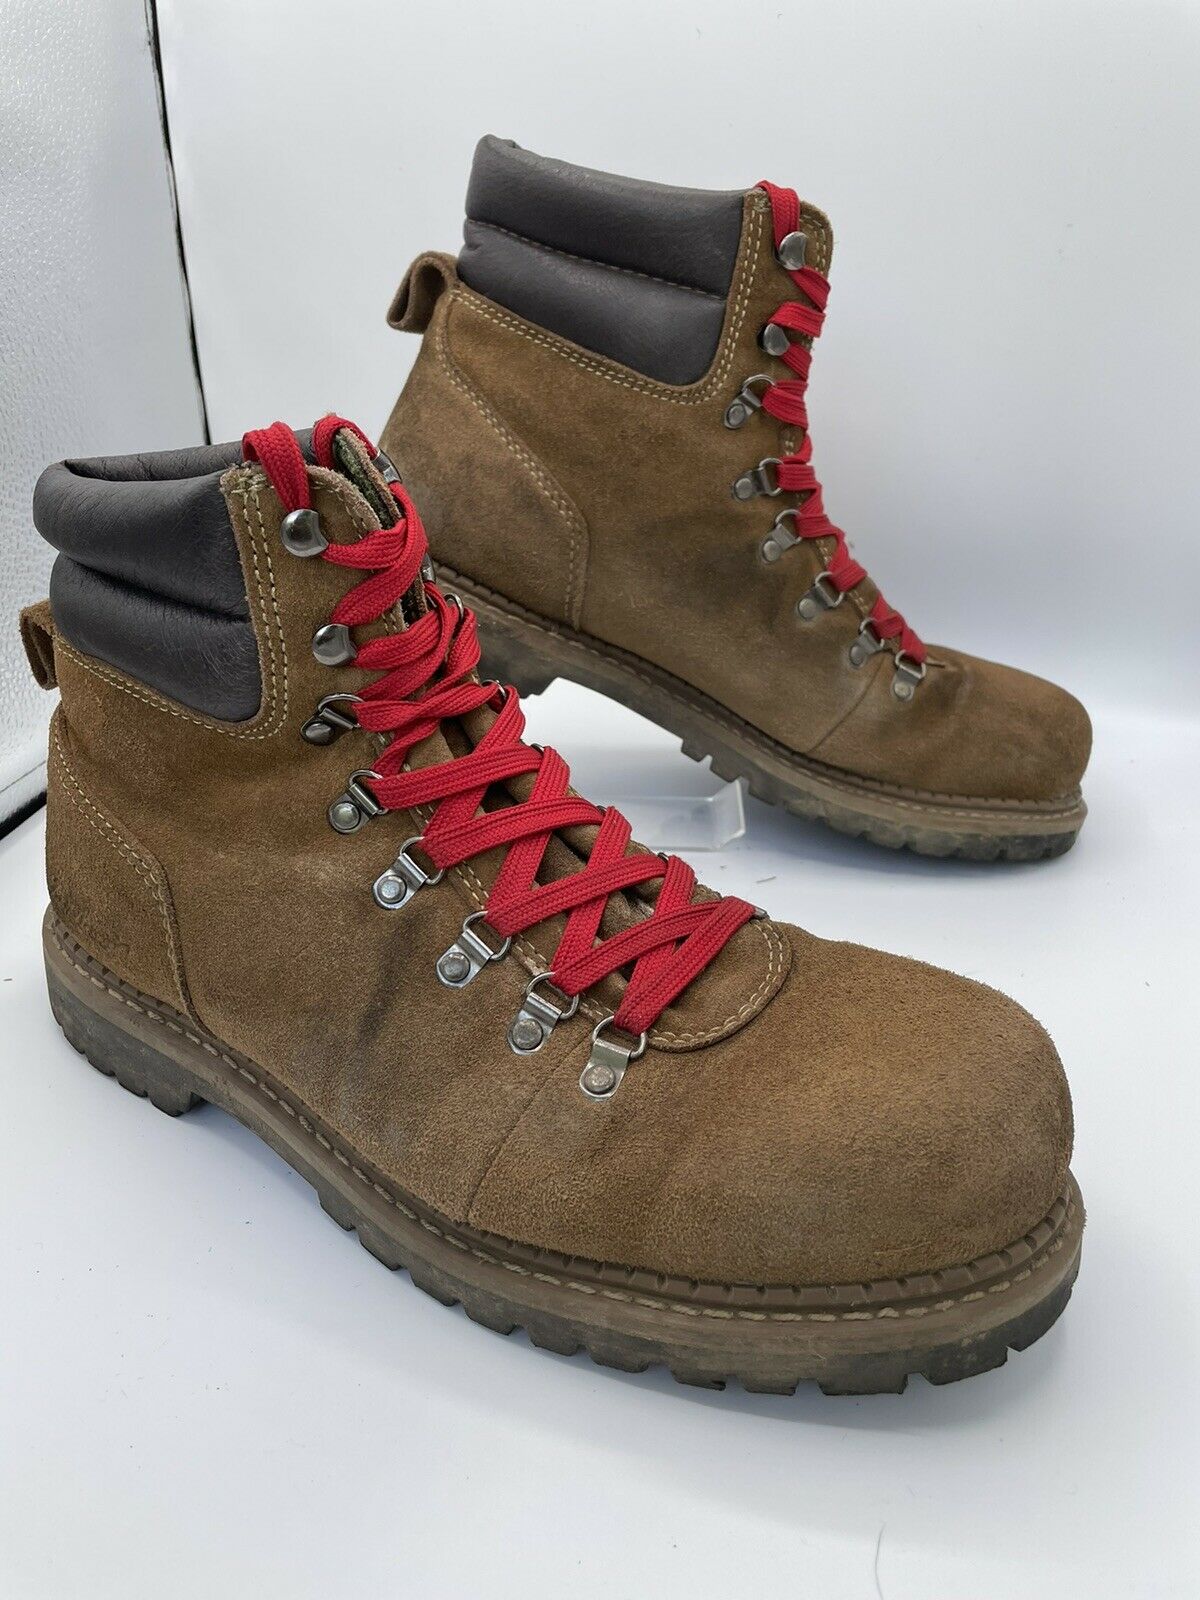 EDDIE BAUER Men’s mountain Hiking Boots Brown leather red laces US Size 11.5 M